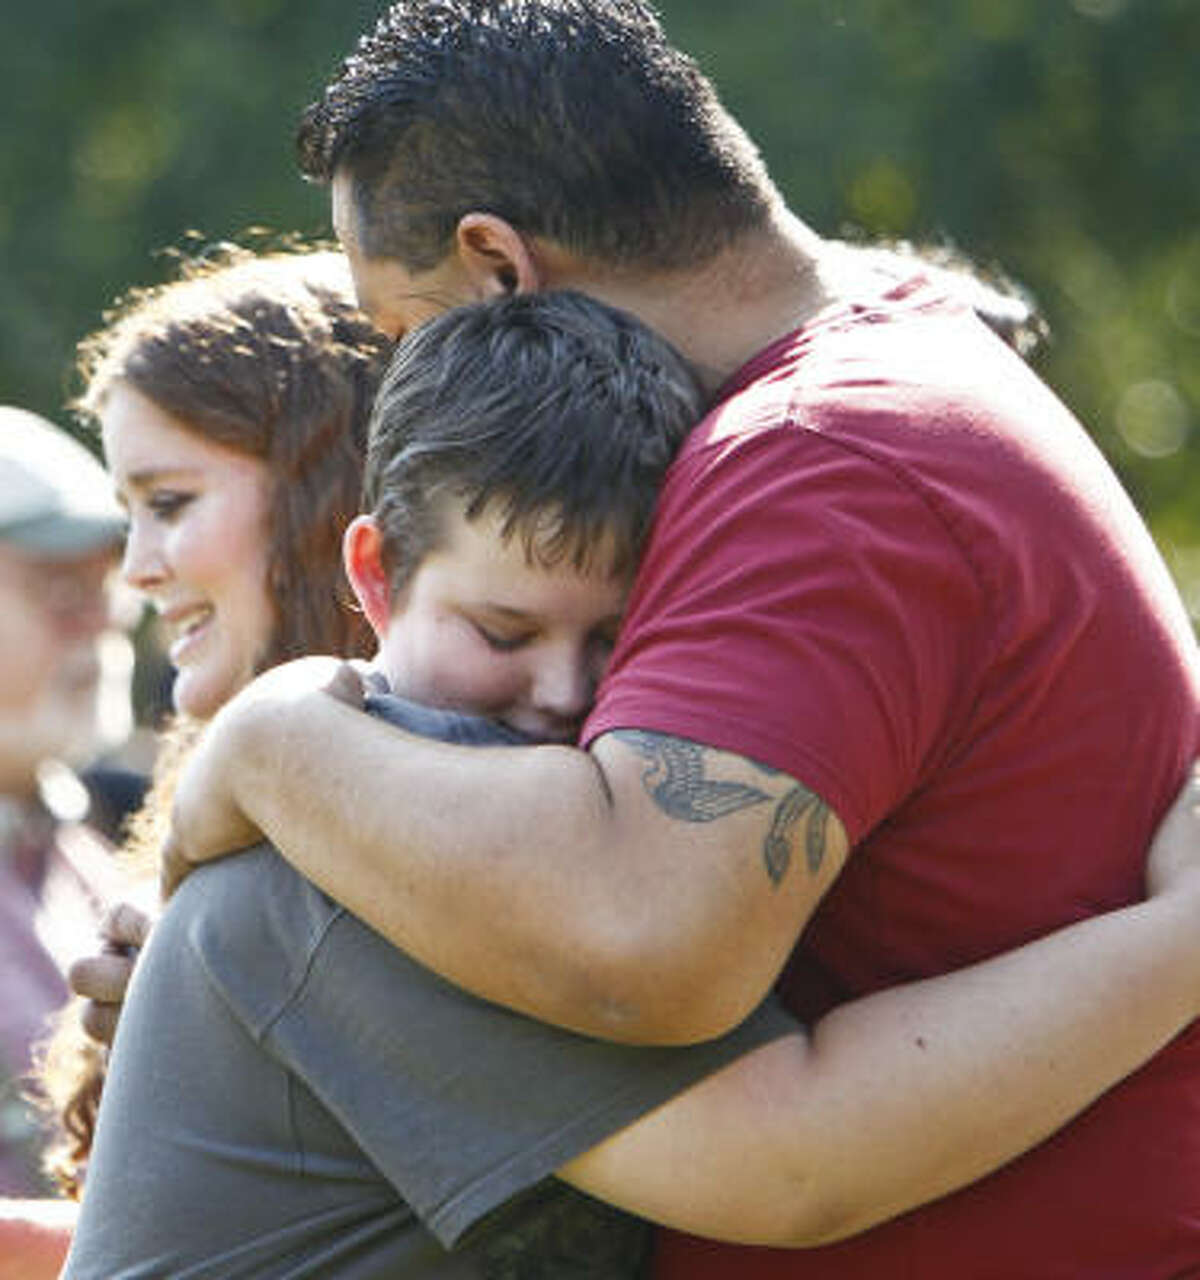 Braydon Young ,14, a classmate and friend of Asher Brown, gets a hug from David Truong, the stepfather of the young suicide victim, during the Saturday memorial service.